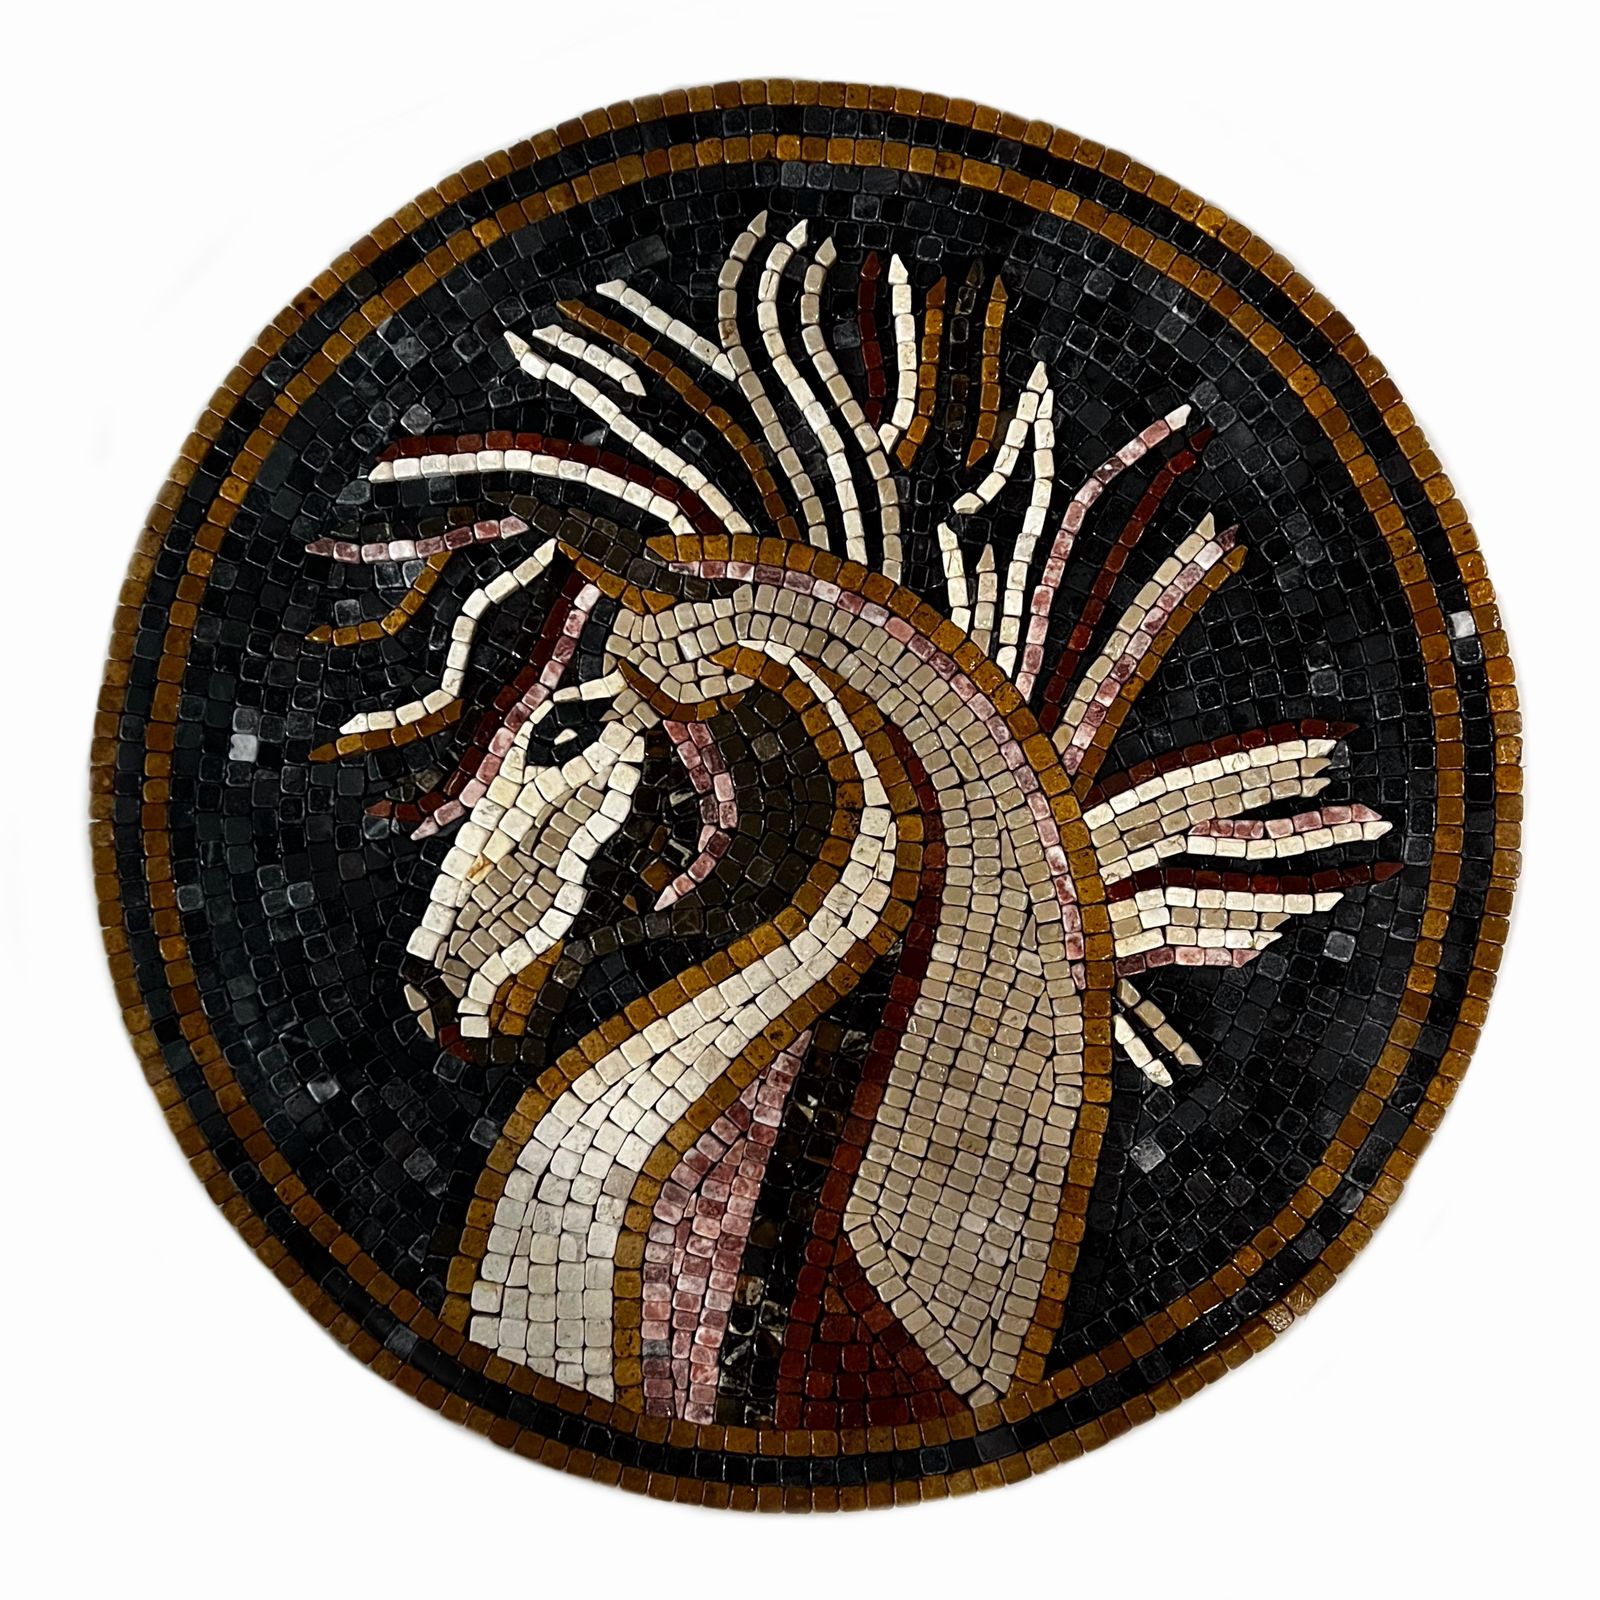 ANDALUSIAN HORSE - Mosaic By Qureshi's